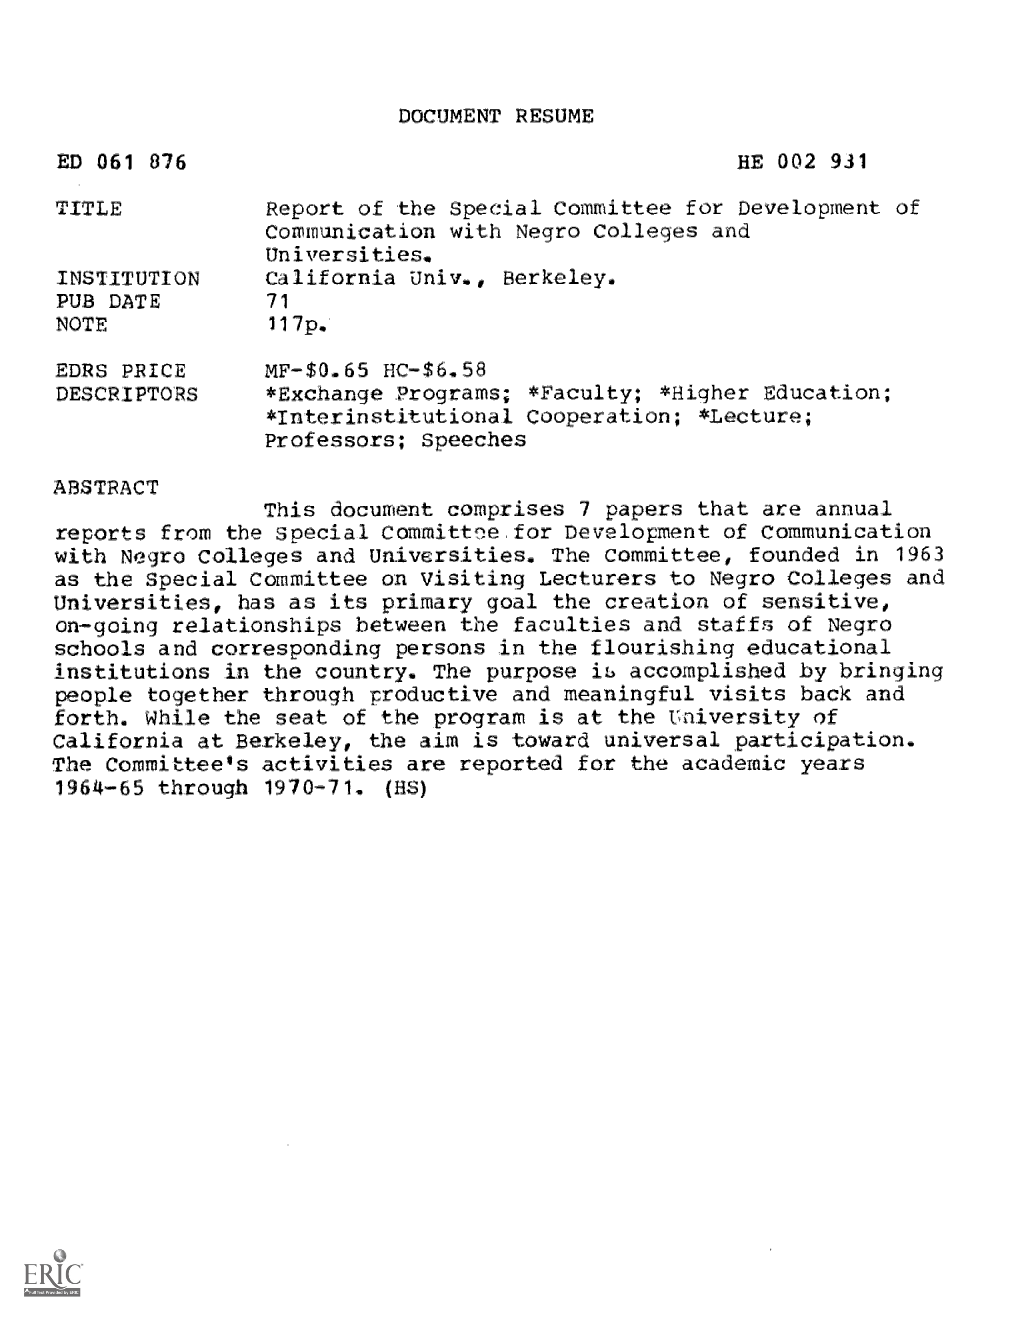 DOCUMENT RESUME ED 061 976 HE 002 931 TITLE Report of the Special Committee for Develop' Communication with Negro Colleges and I